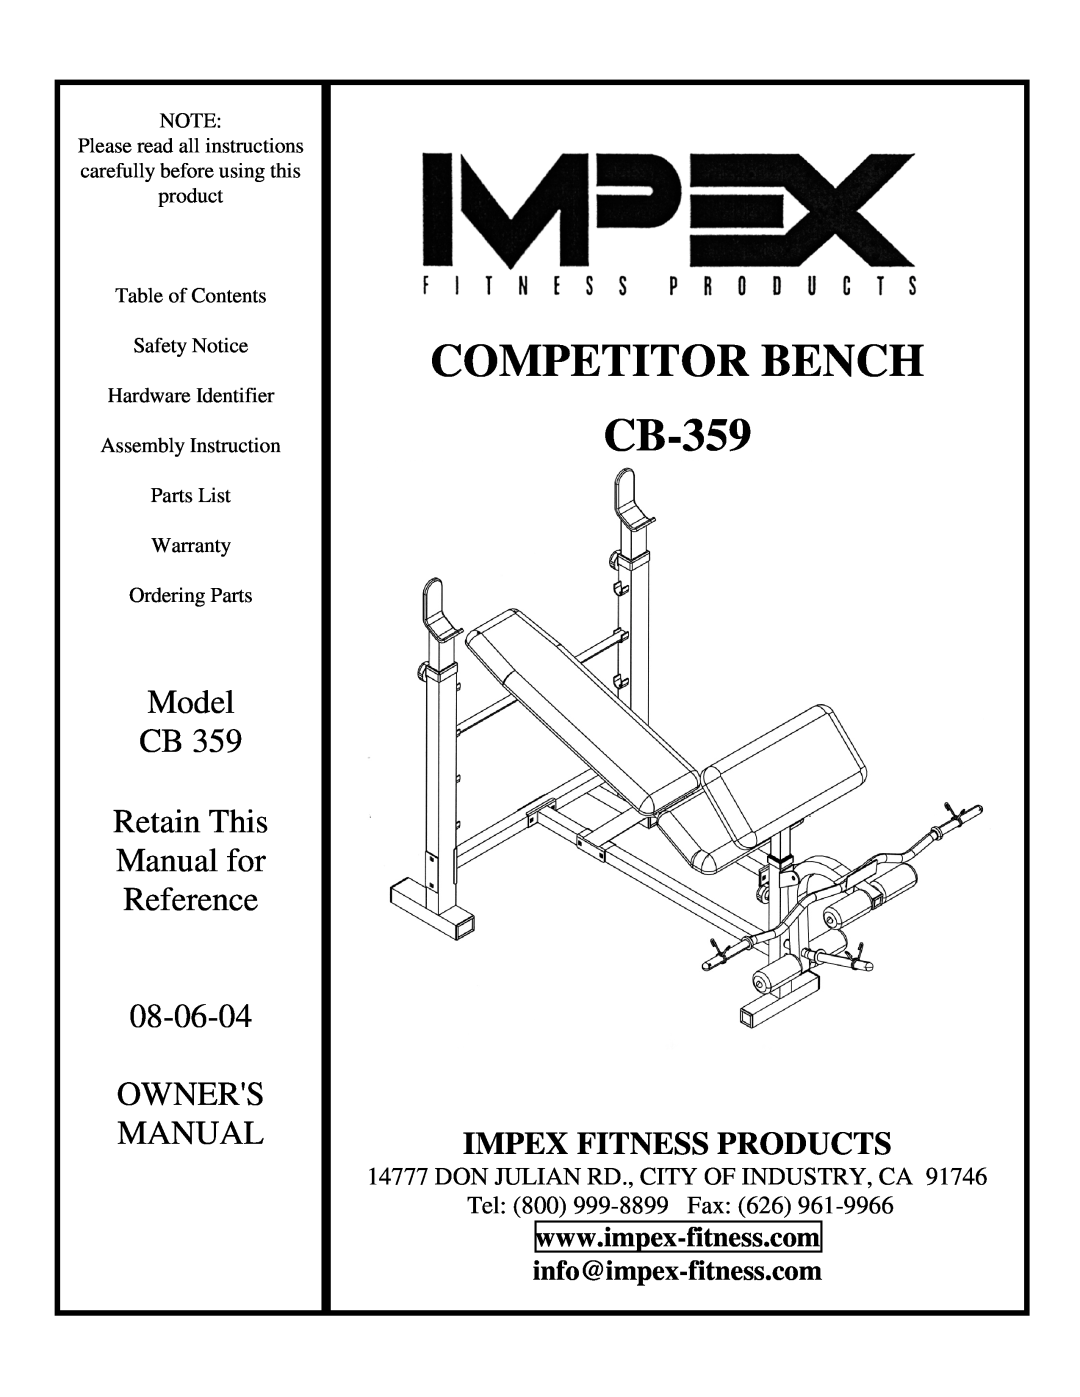 Impex CB-359 manual info@impex-fitness.com, Competitor Bench, Model, Retain This, Manual for, Reference, Owners, 08-06-04 